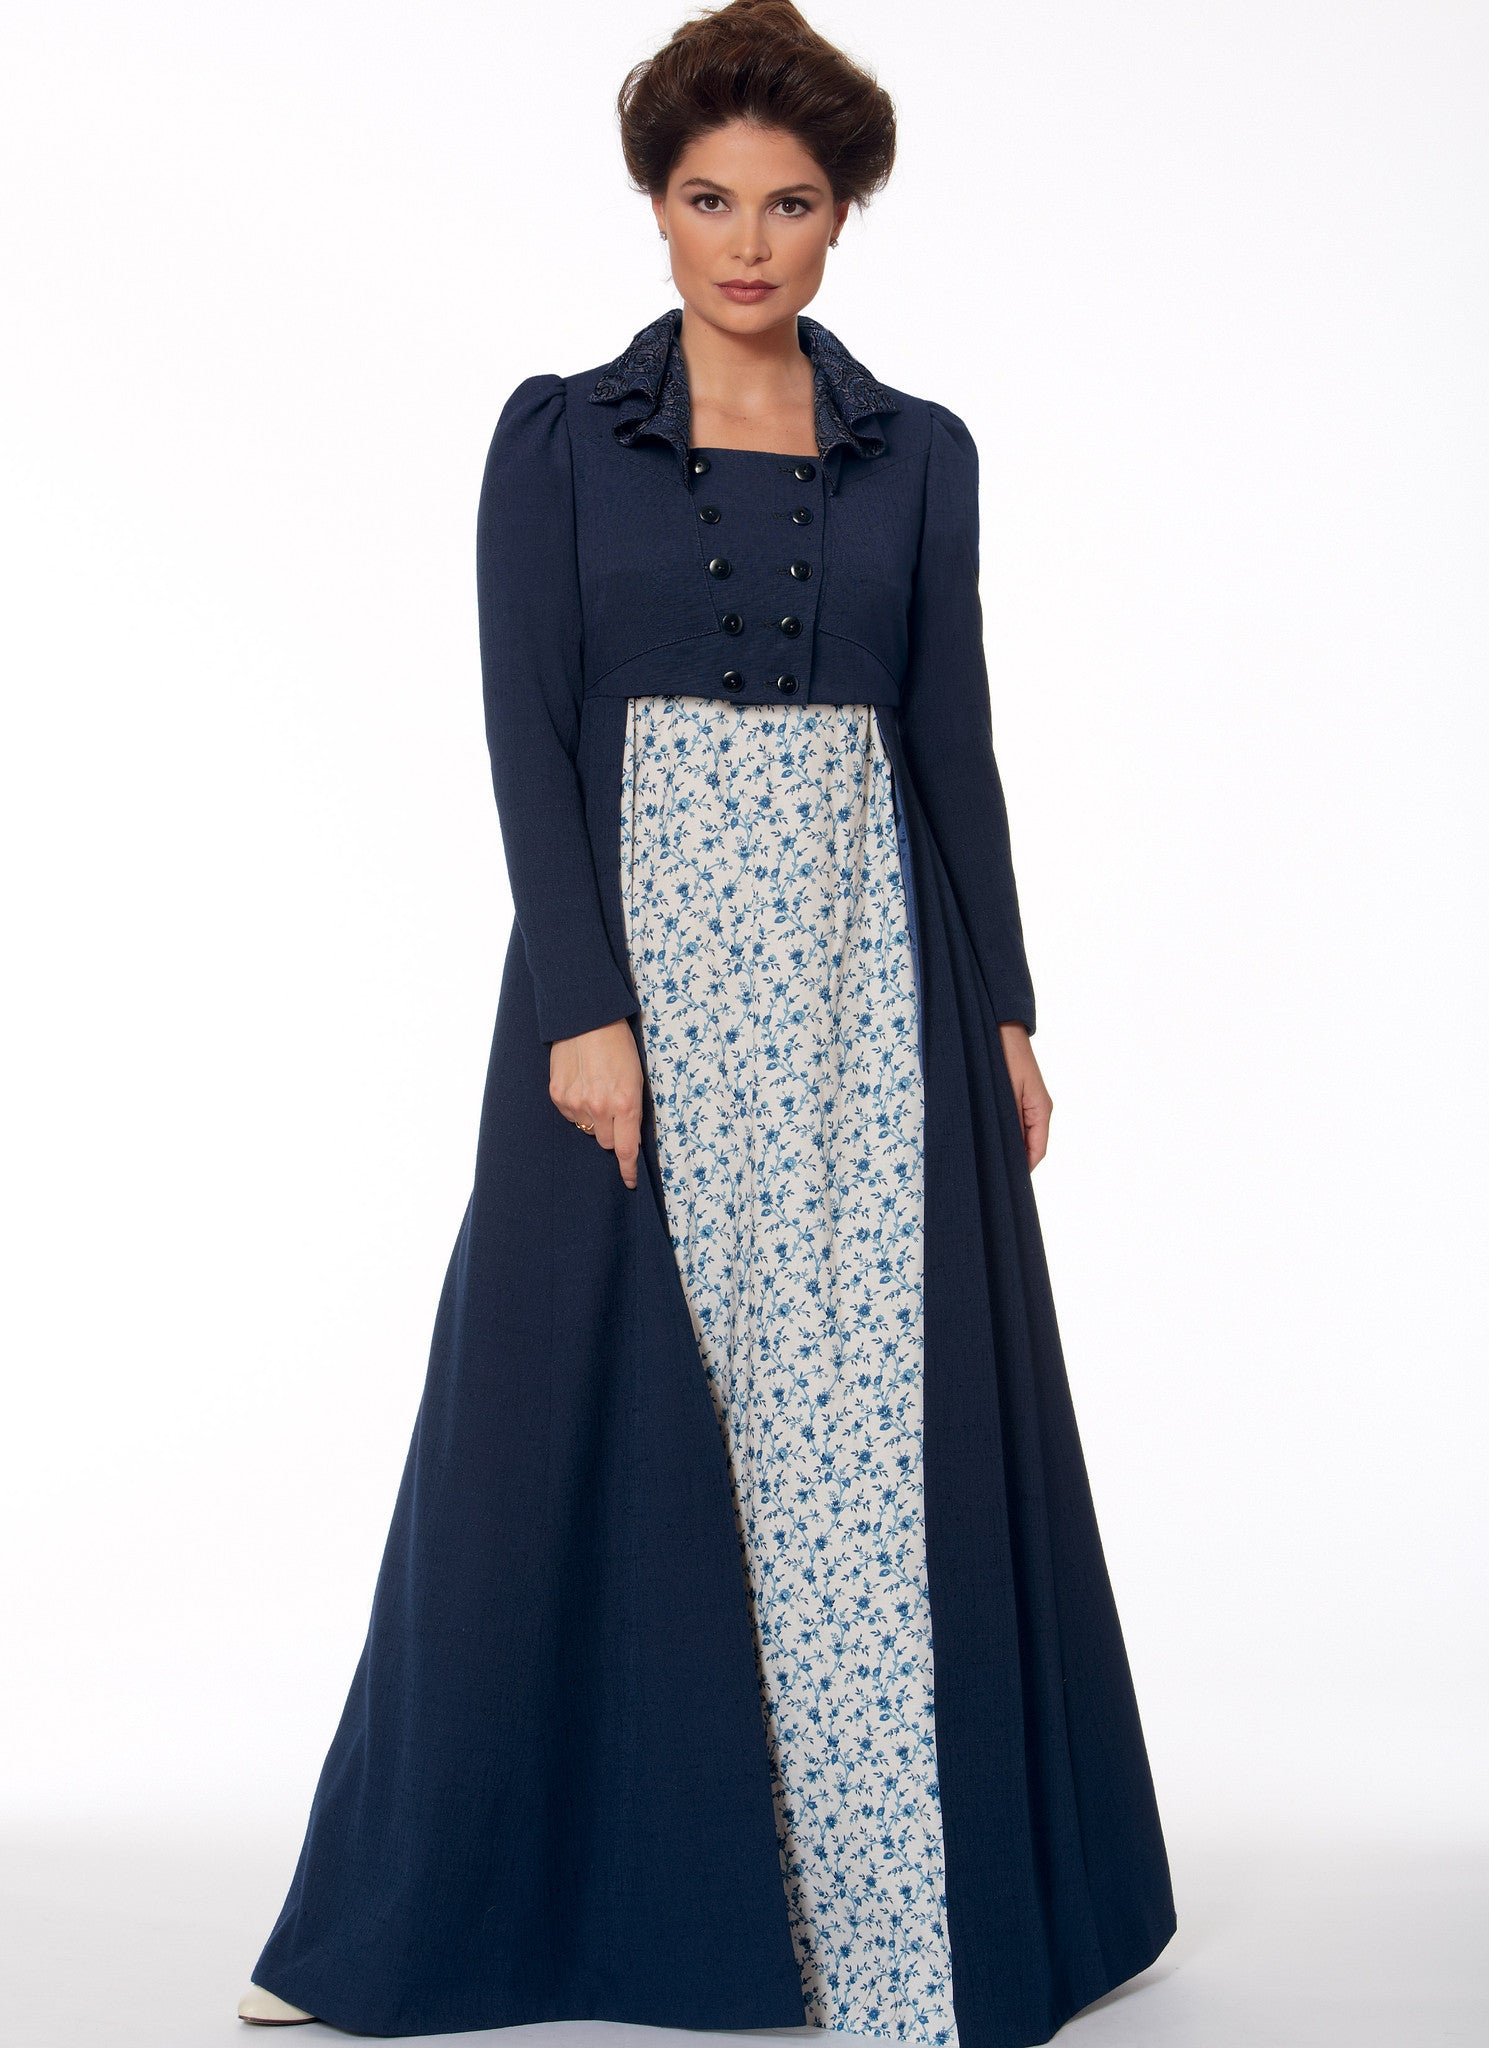 M7493 Cropped Jacket, Floor-Length Coat and A-Line, Square-Neck Dress from Jaycotts Sewing Supplies